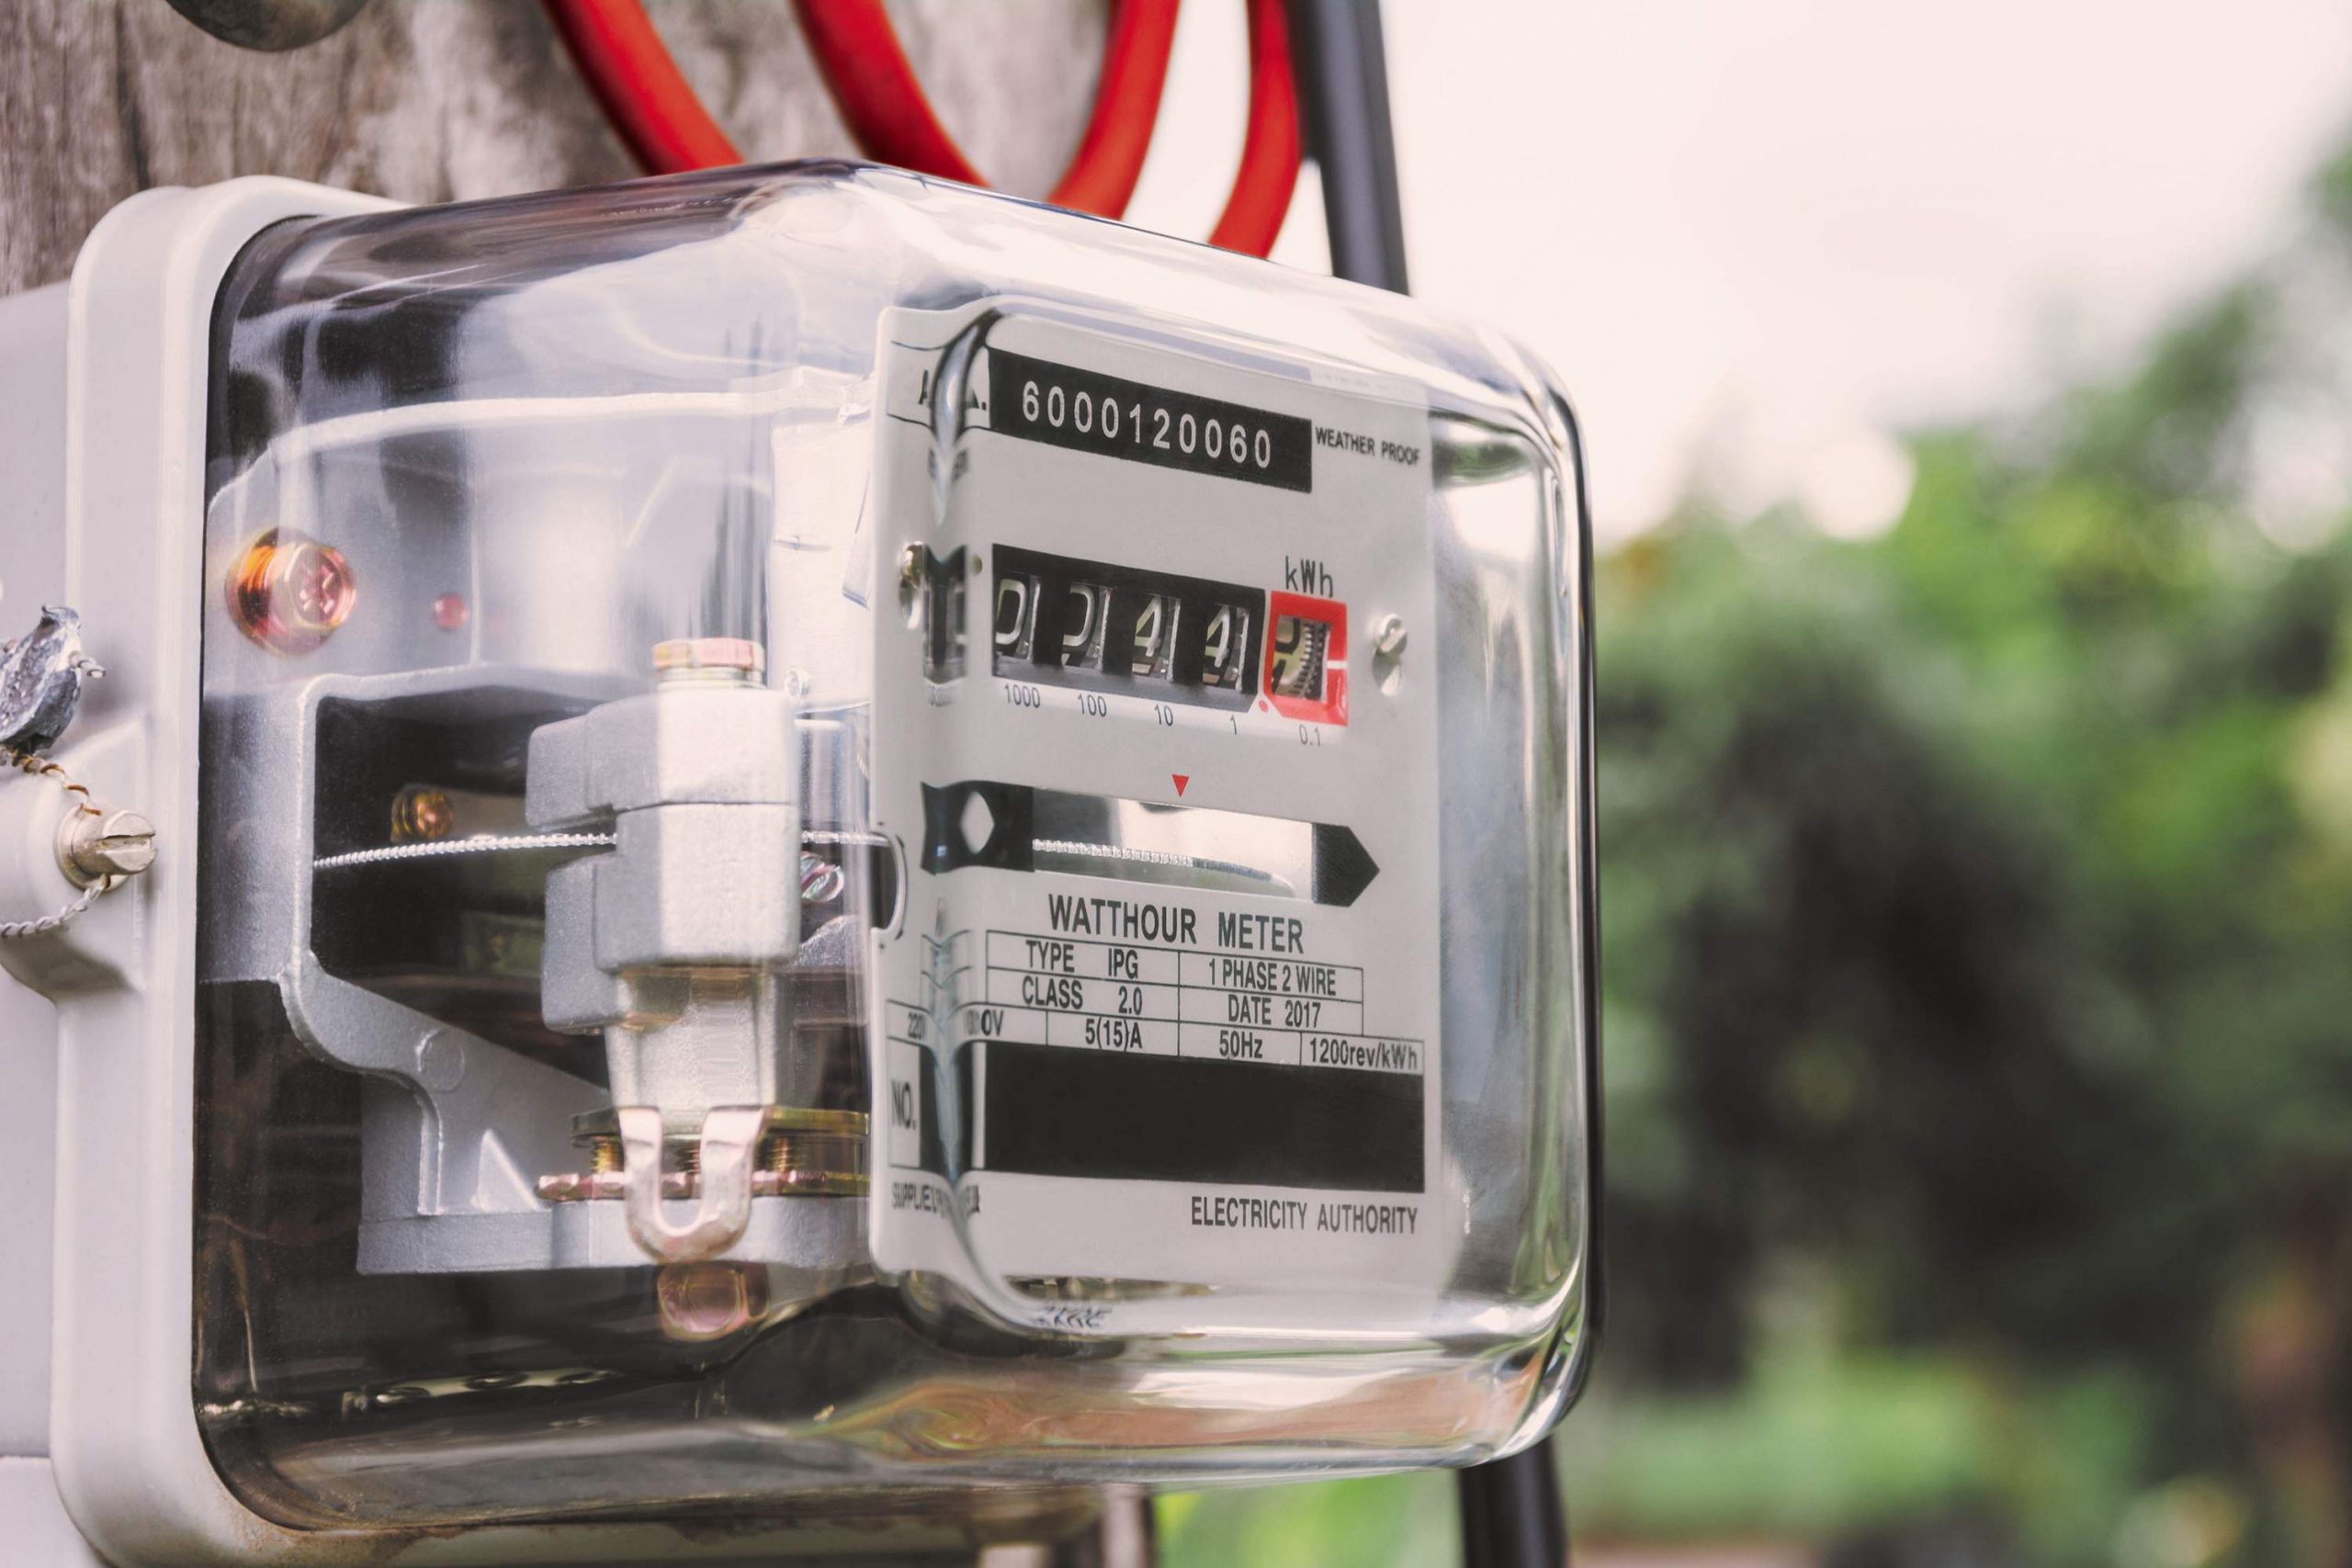 Smart Metering - A Digital Approach of Connected Devices